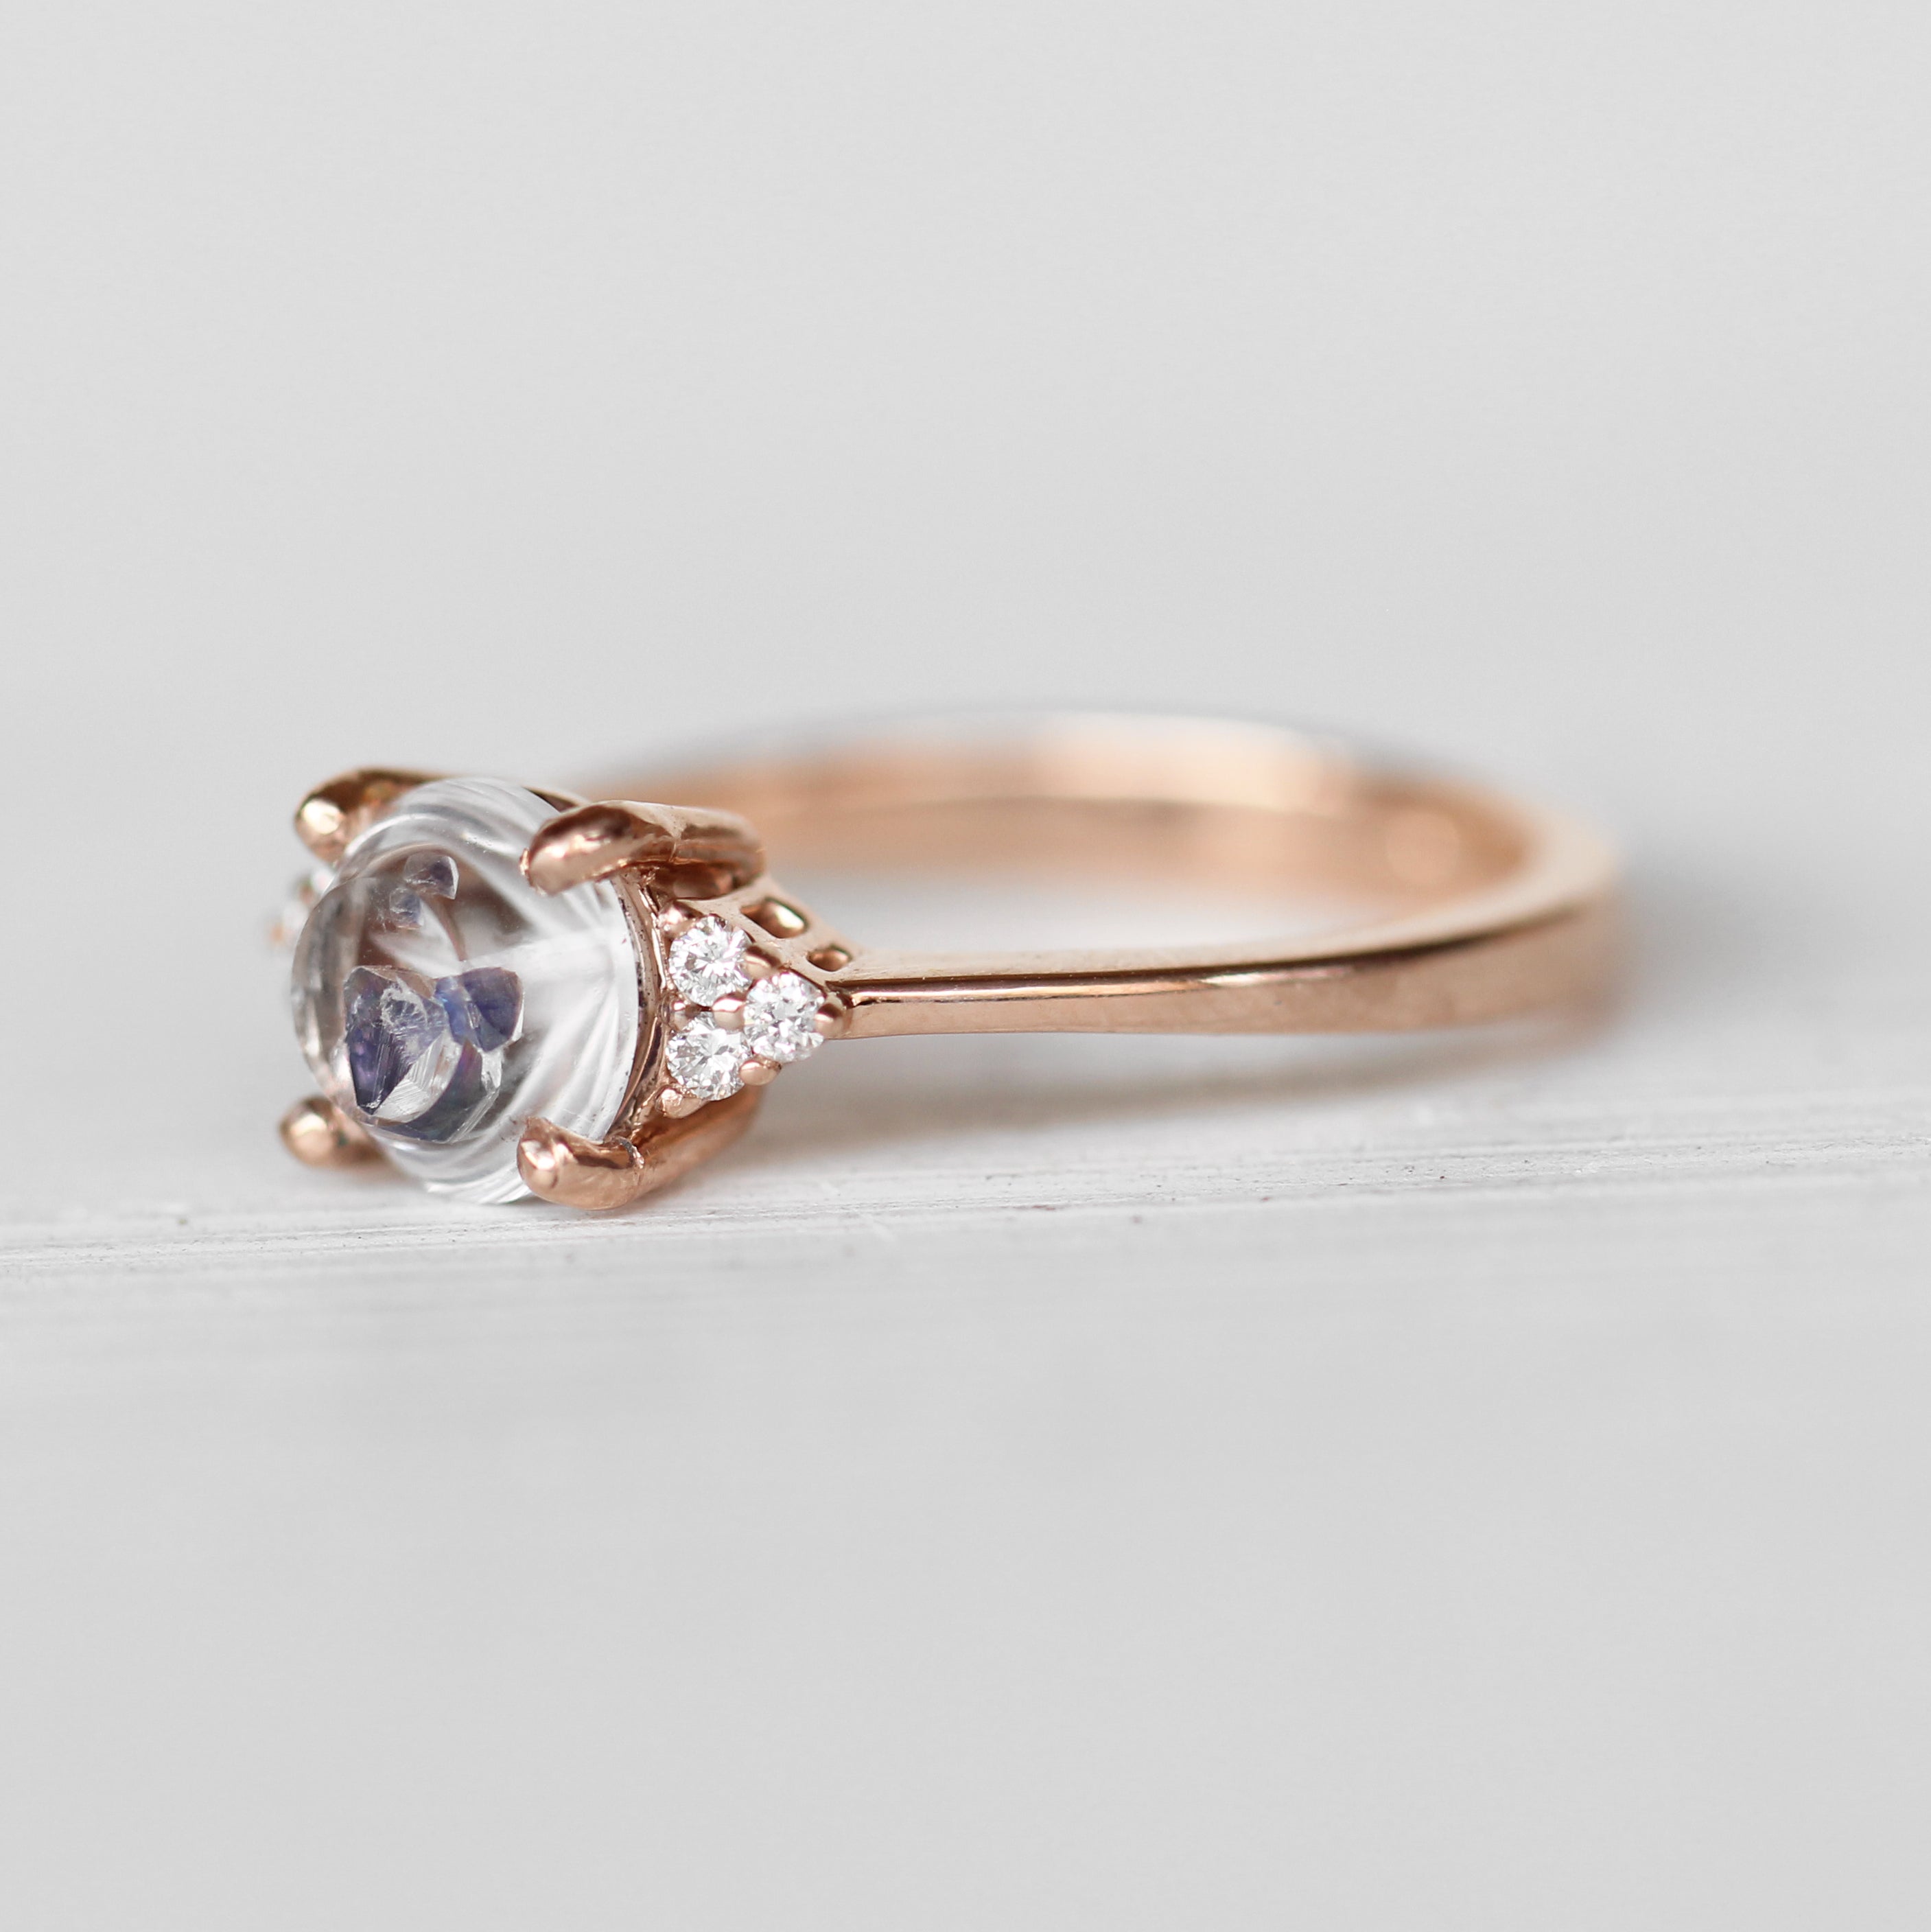 Imogene Ring with a 1.3 ct Fluorite Quartz in 14k Rose Gold - Ready to ...